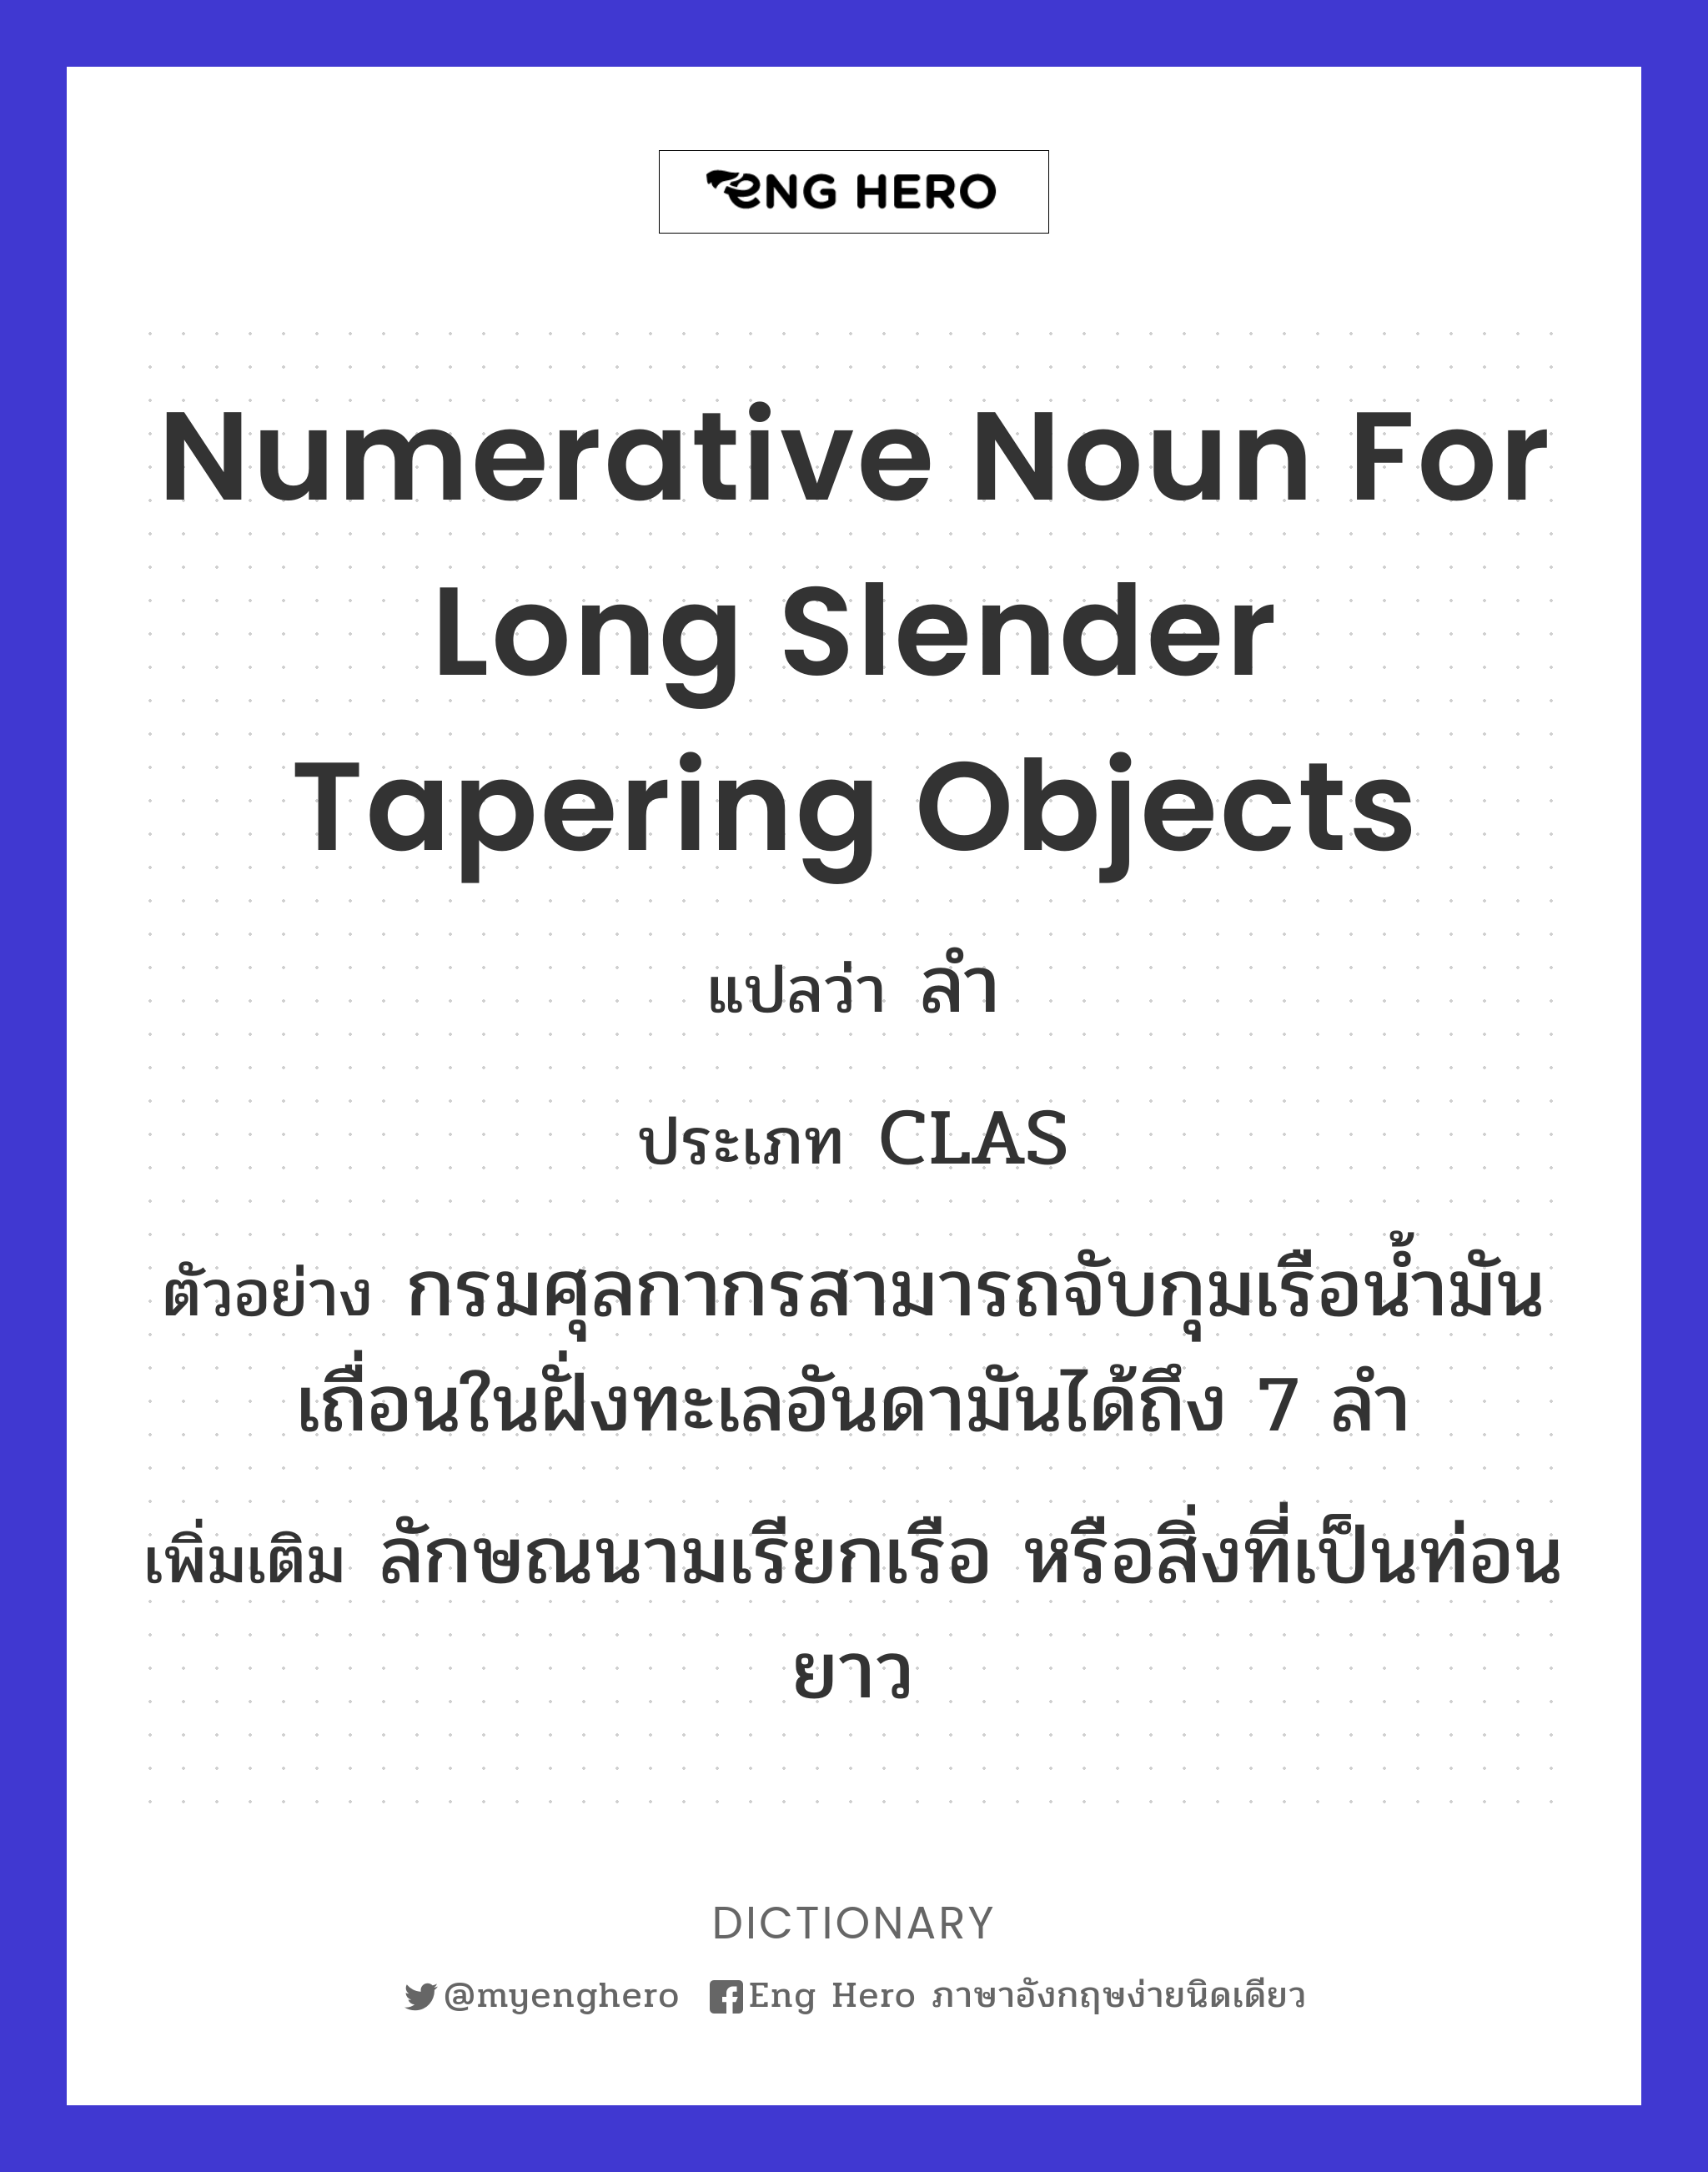 numerative noun for long slender tapering objects